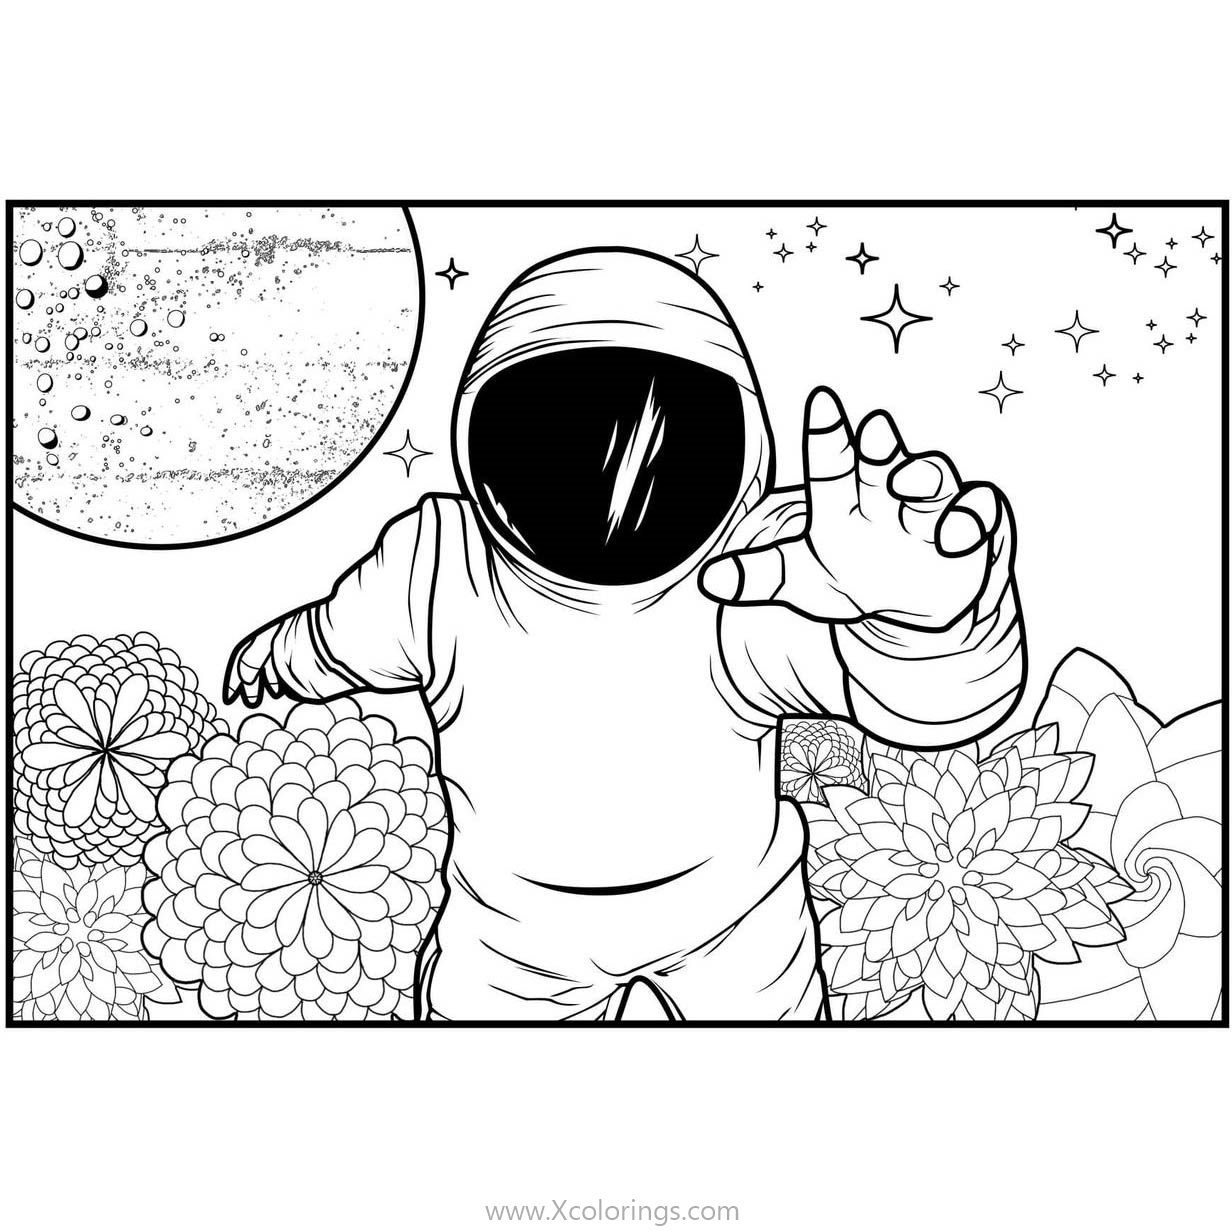 Free Outer Space Astronaut Coloring Pages for Adults printable